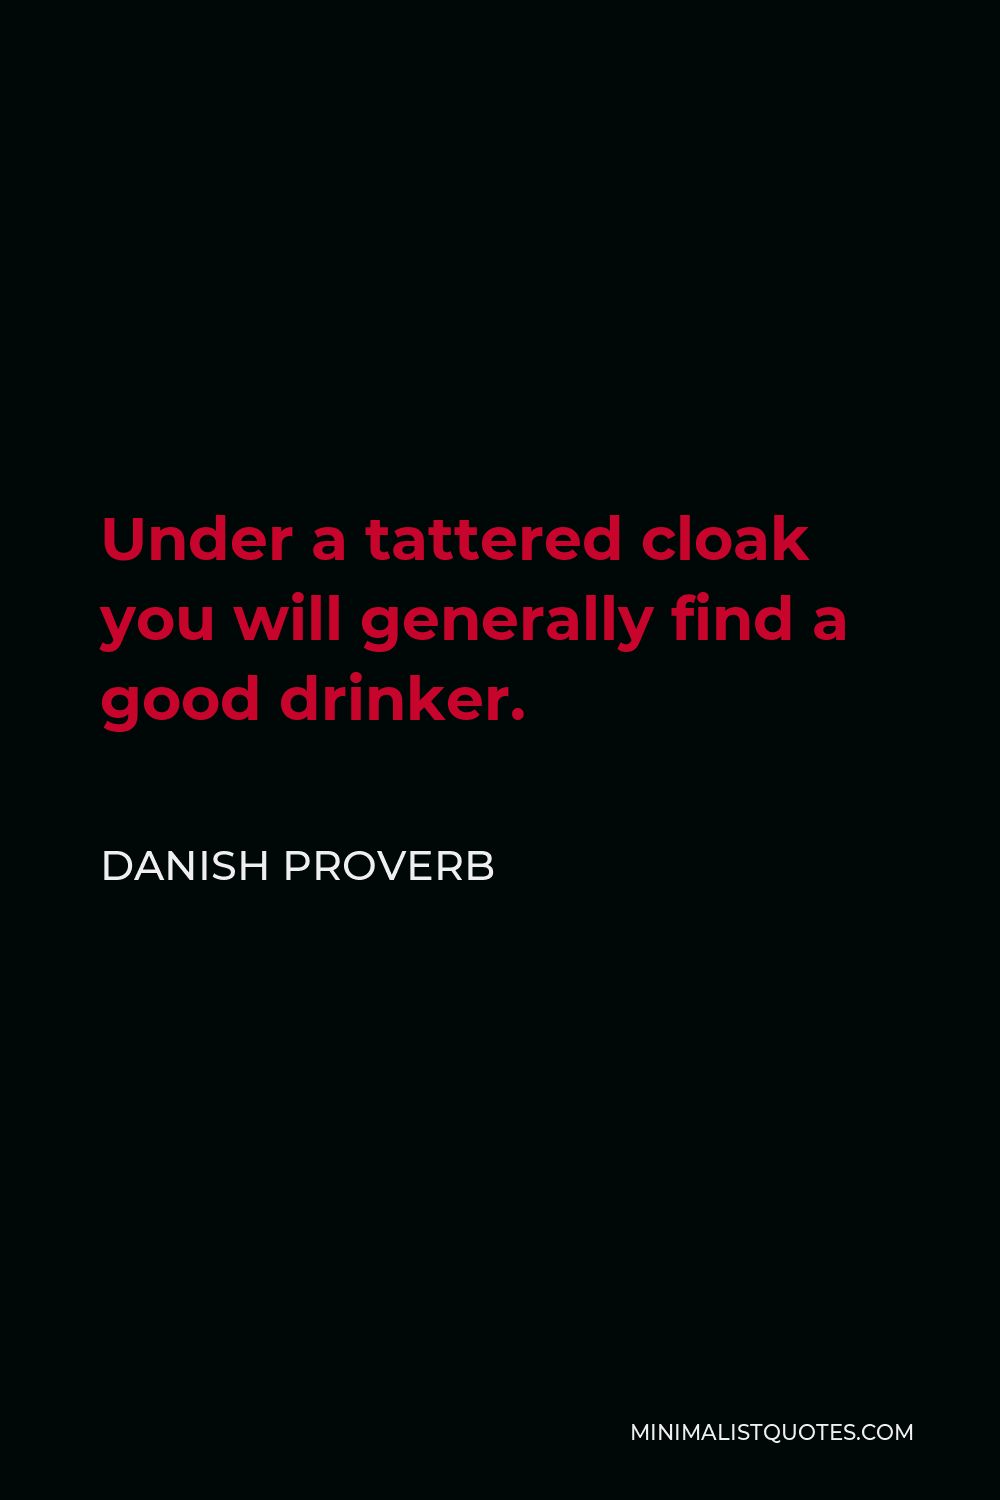 Danish Proverb Quote - Under a tattered cloak you will generally find a good drinker.